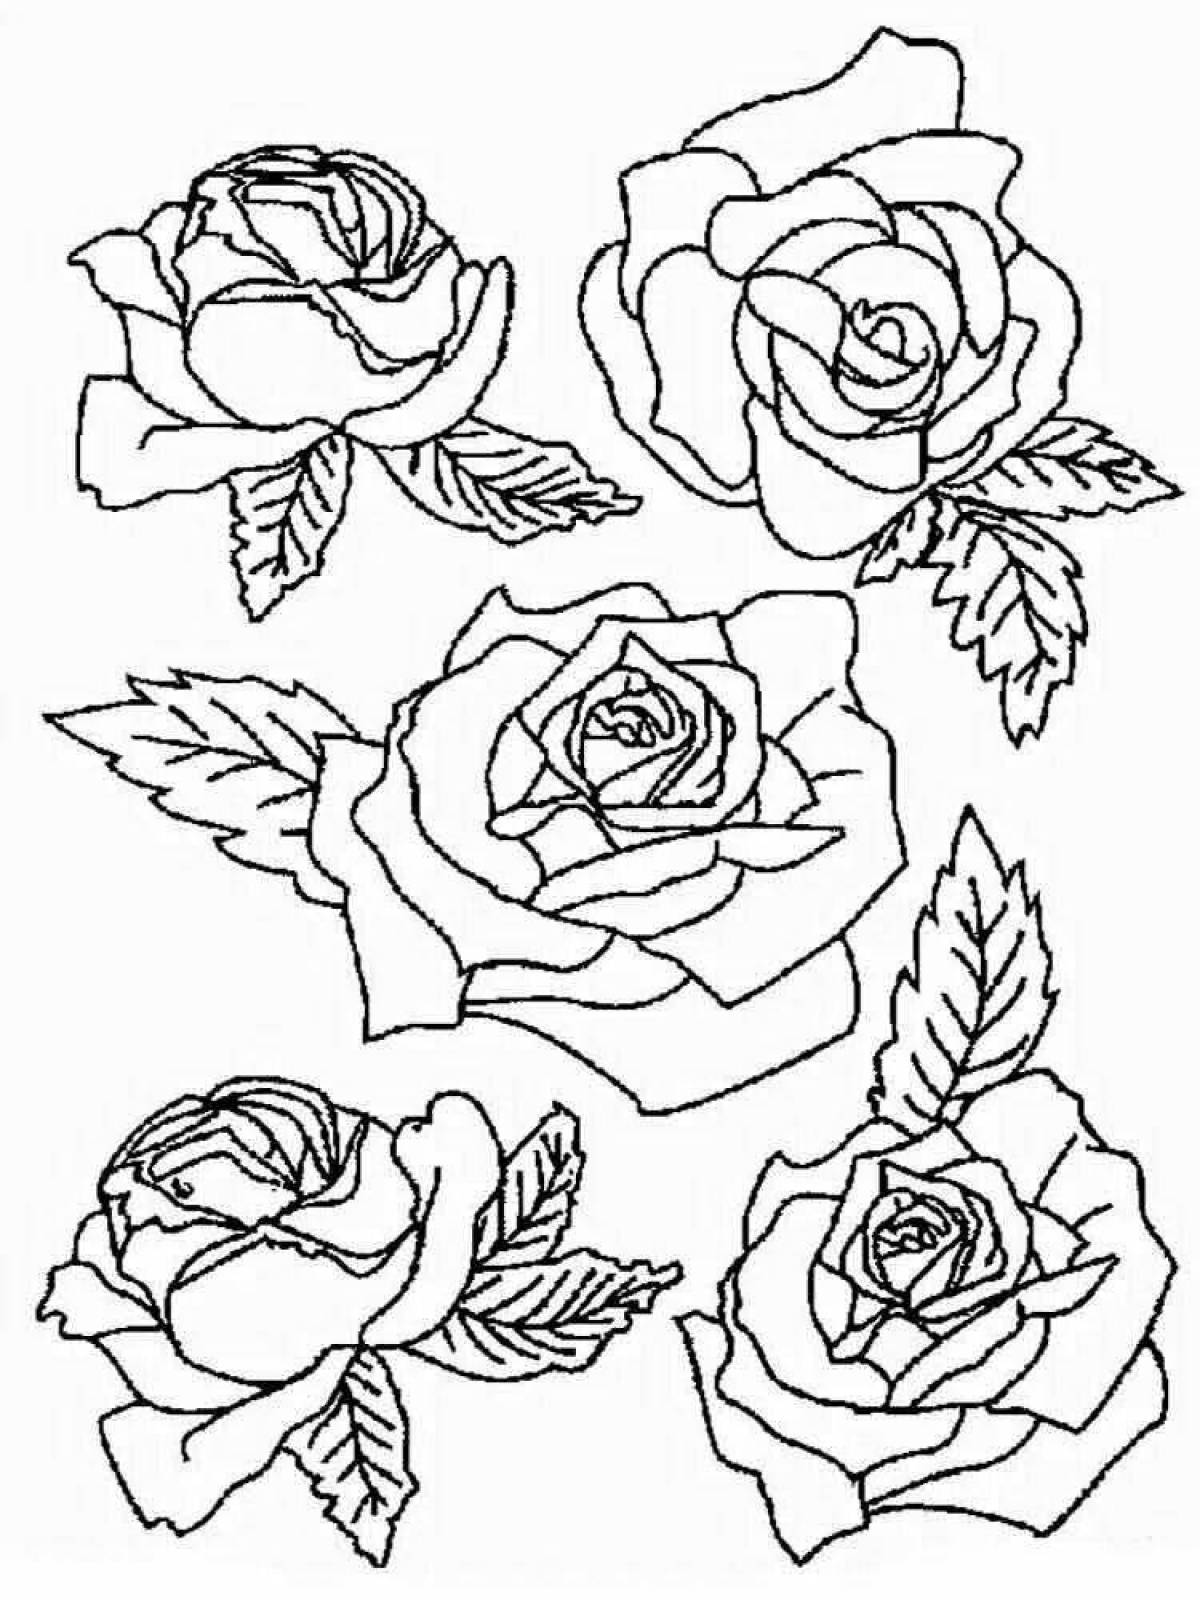 Artistic coloring drawing of a rose